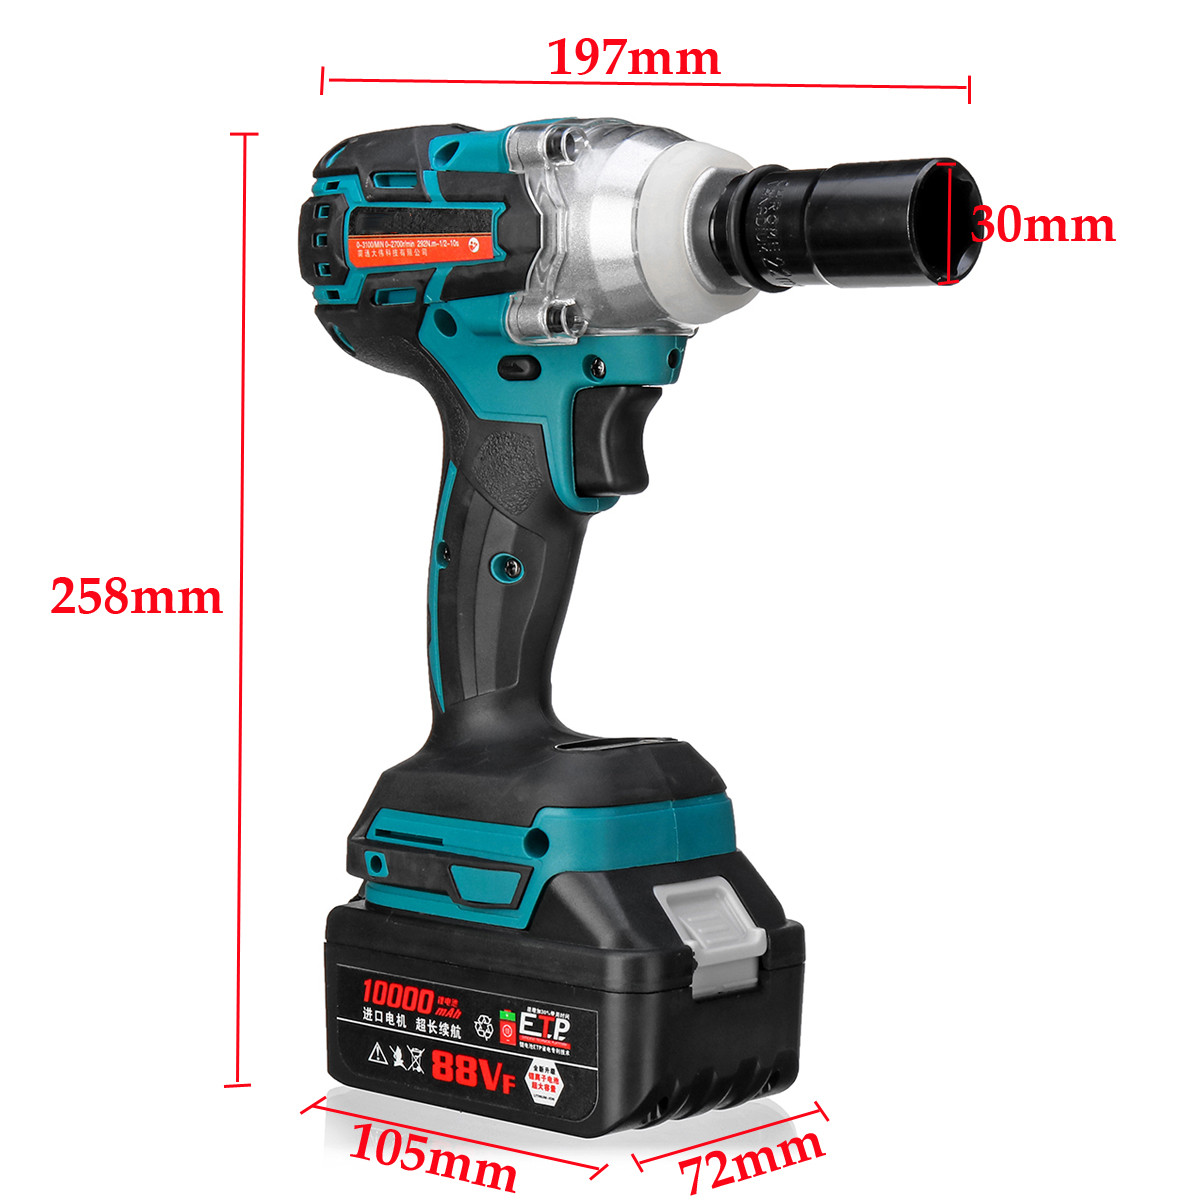 21V-330Nm-10000mAh-Lithium-Electric-Impact-Wrench-Cordless-with-2-Batteries-1399342-6